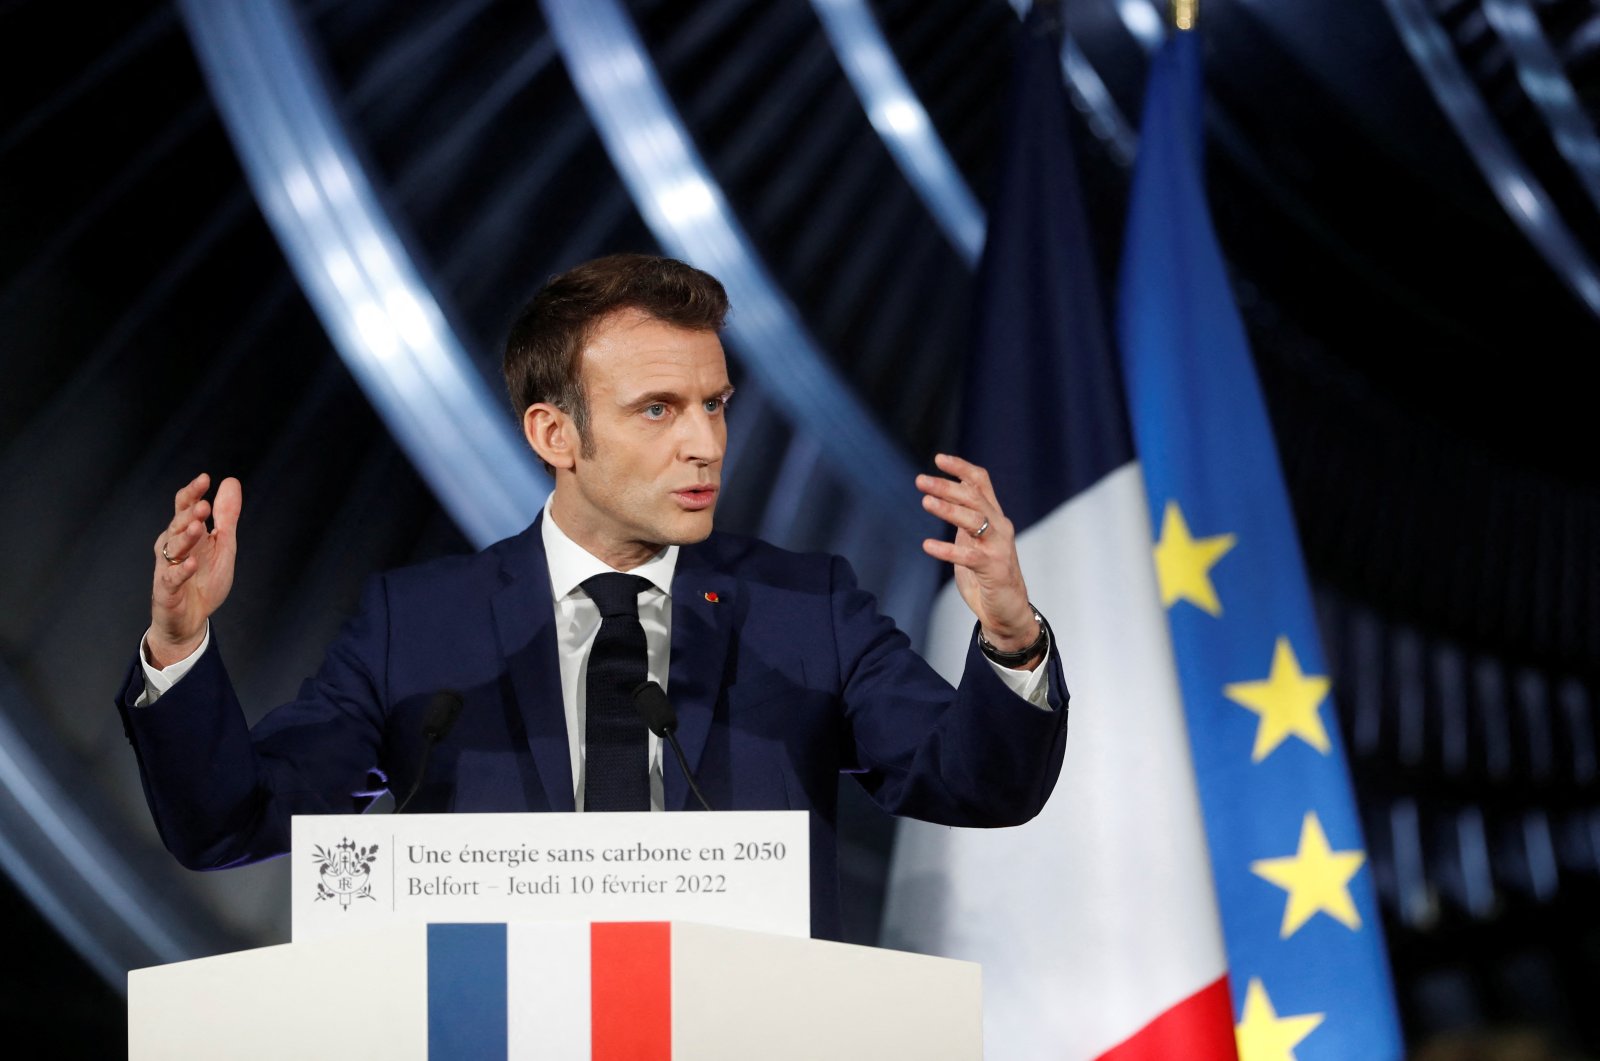 French President Emmanuel Macron delivers a speech at the main production site of GE Steam Power System, where he unveiled plans to build new nuclear reactors in the country as part of its energy strategy to reduce planet-warming emissions, in Belfort, France, Feb. 10, 2022. (Reuters Photo)